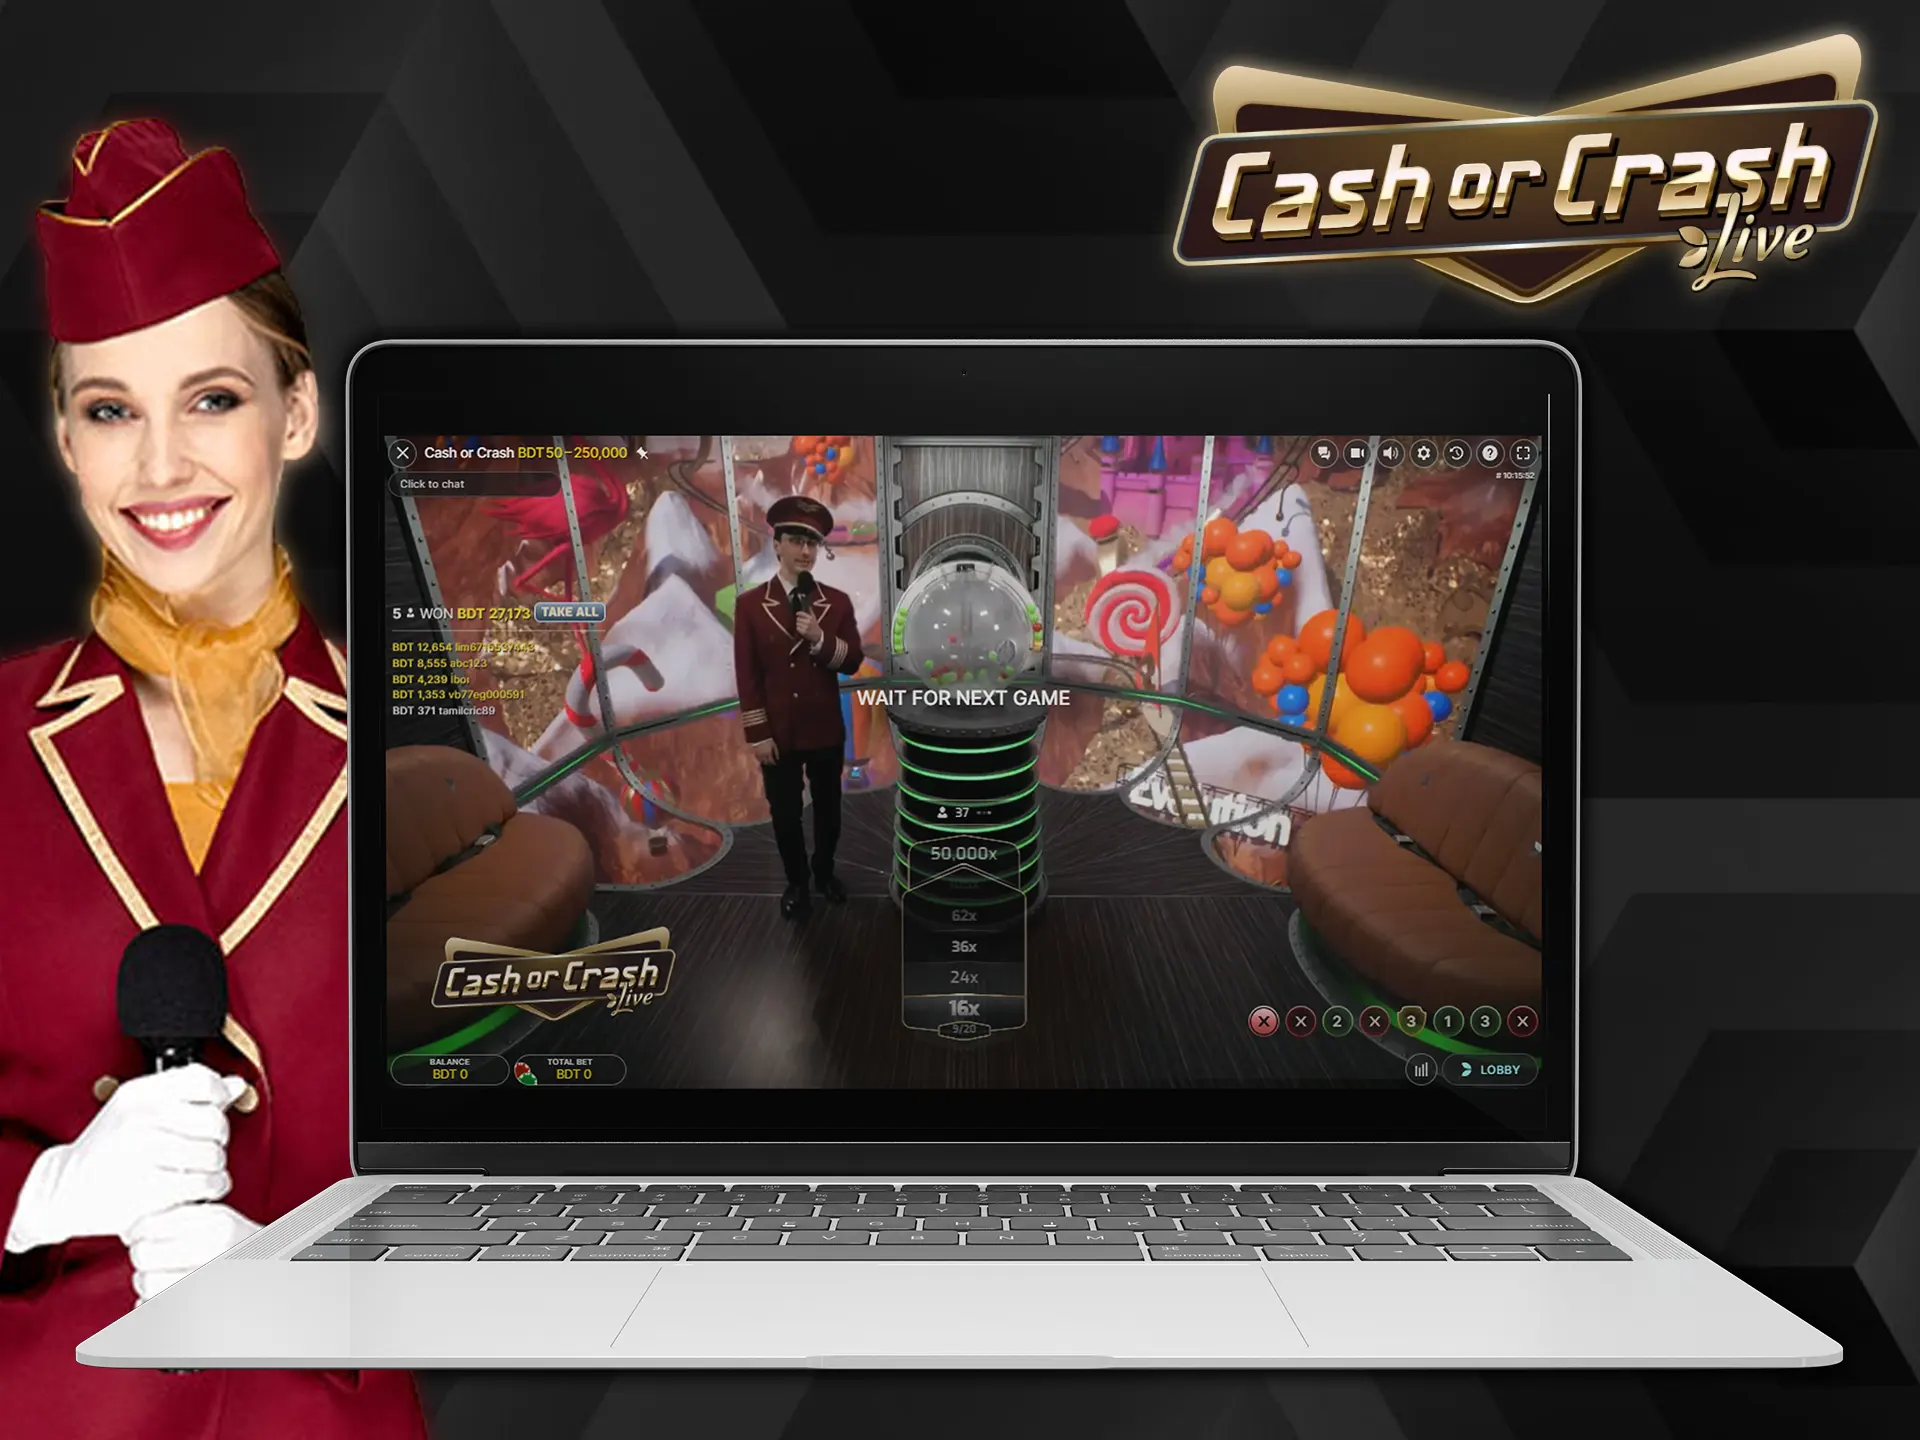 Win your biggest prize in the Cash or Crash game.